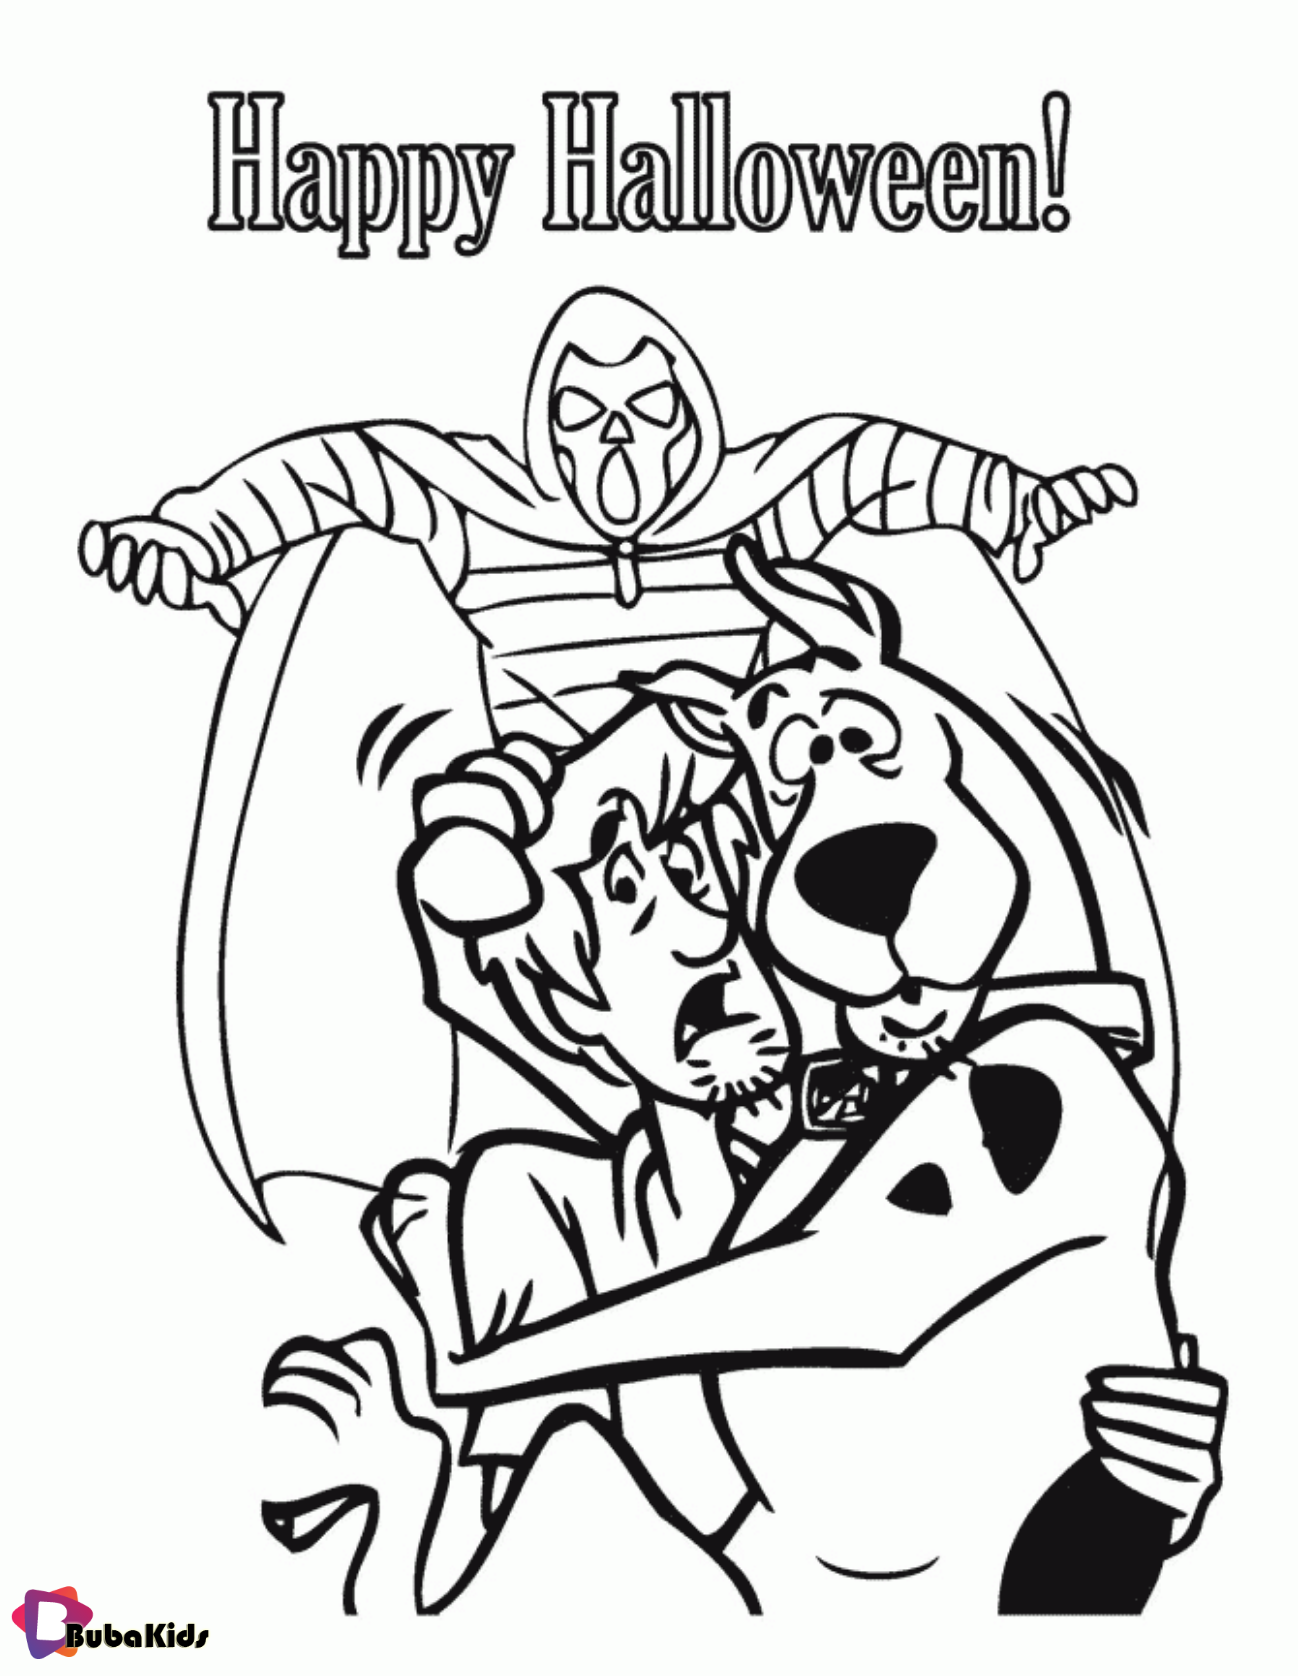 Happy Halloween Scooby Doo and Shaggy printable coloring page. Wallpaper